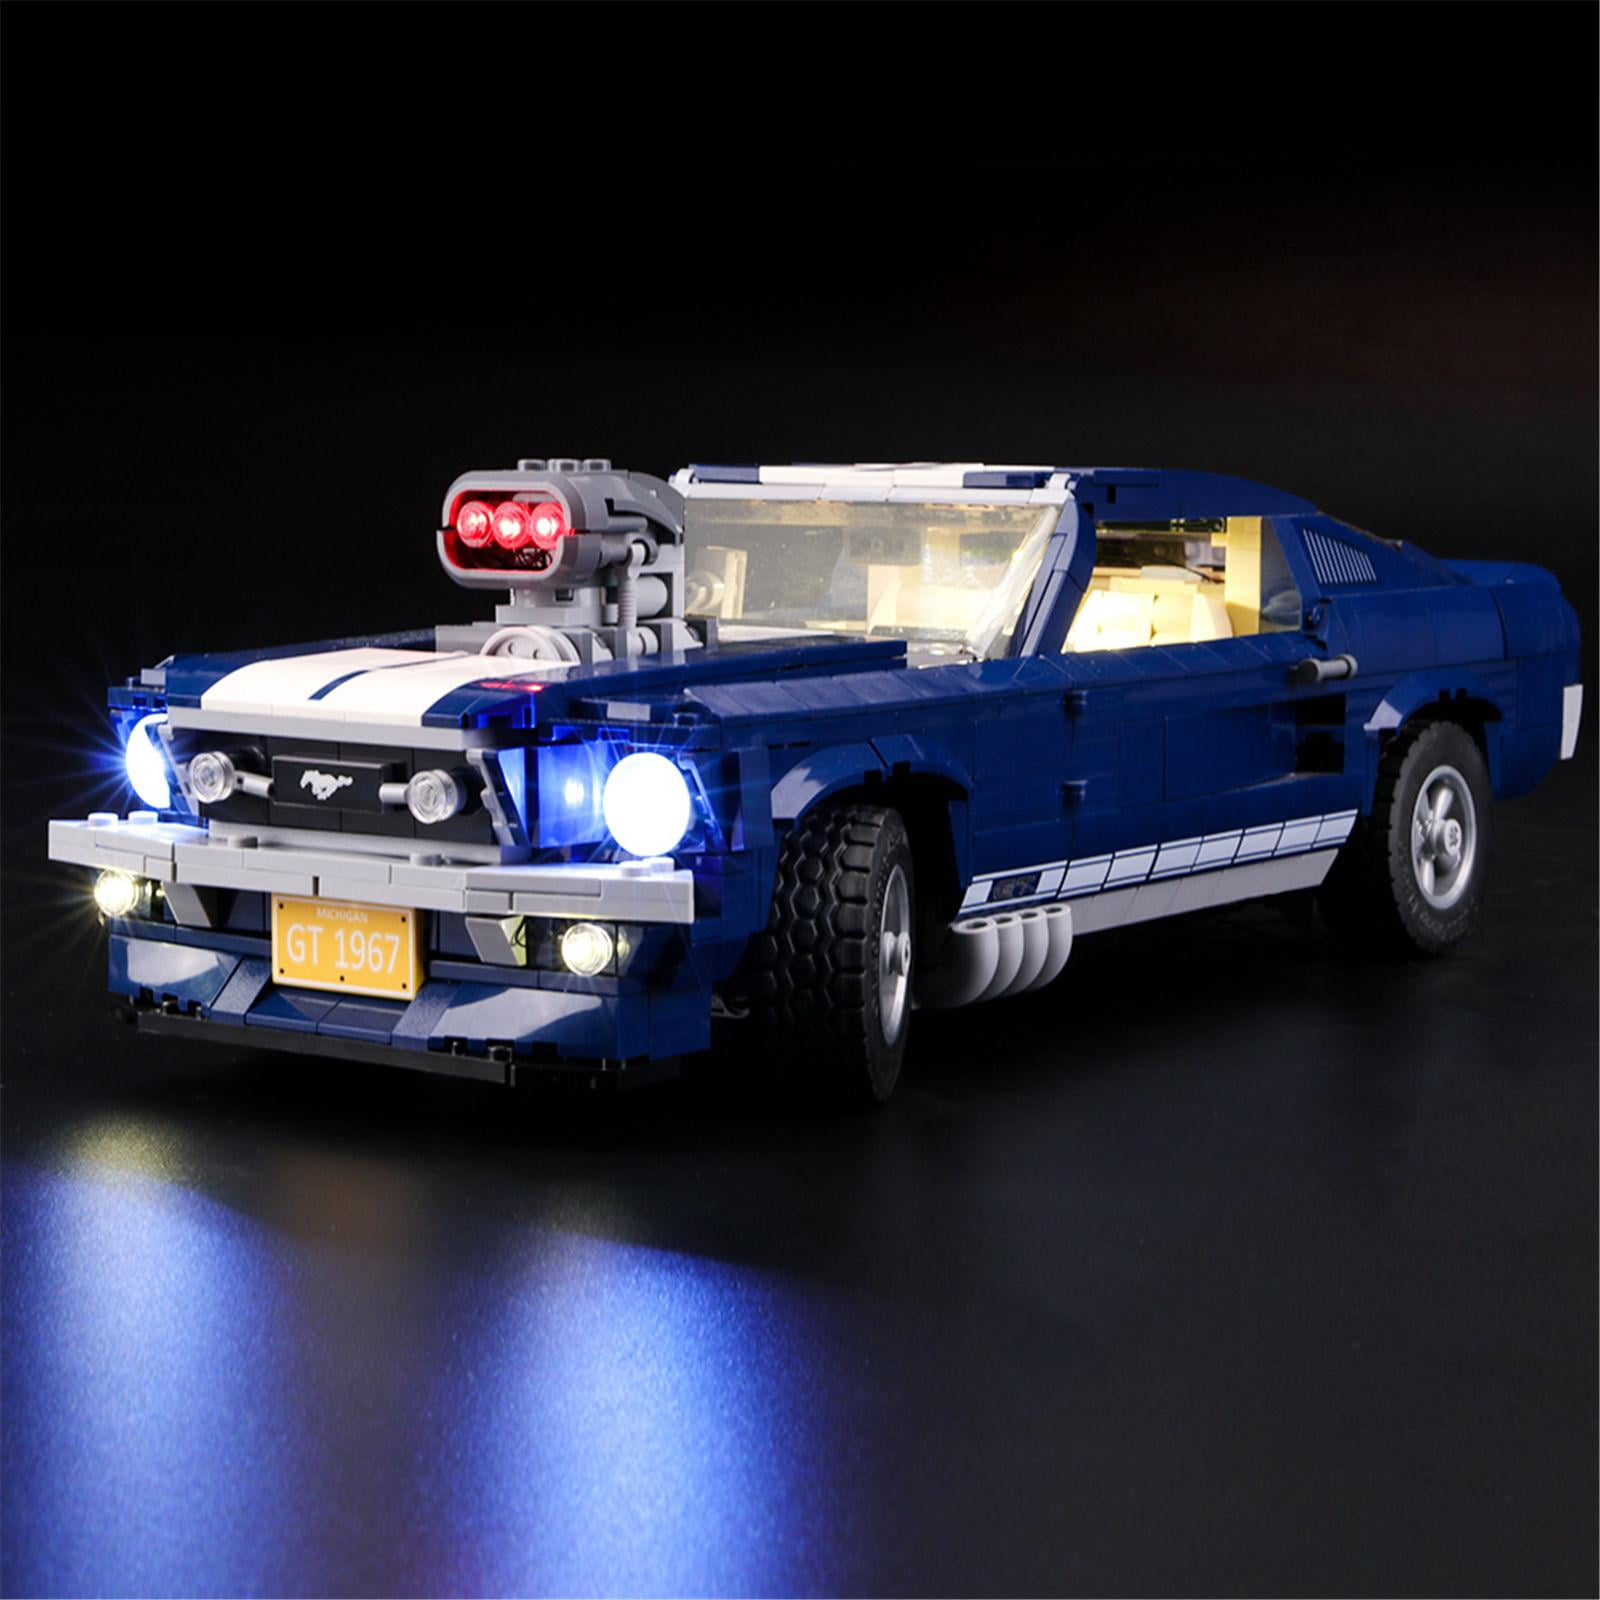 Led Set for Creator Expert Ford Mustang, Light Kit Compatible with Legos 10265 Building Blocks Model (Not Include the Building Set) - Walmart.com